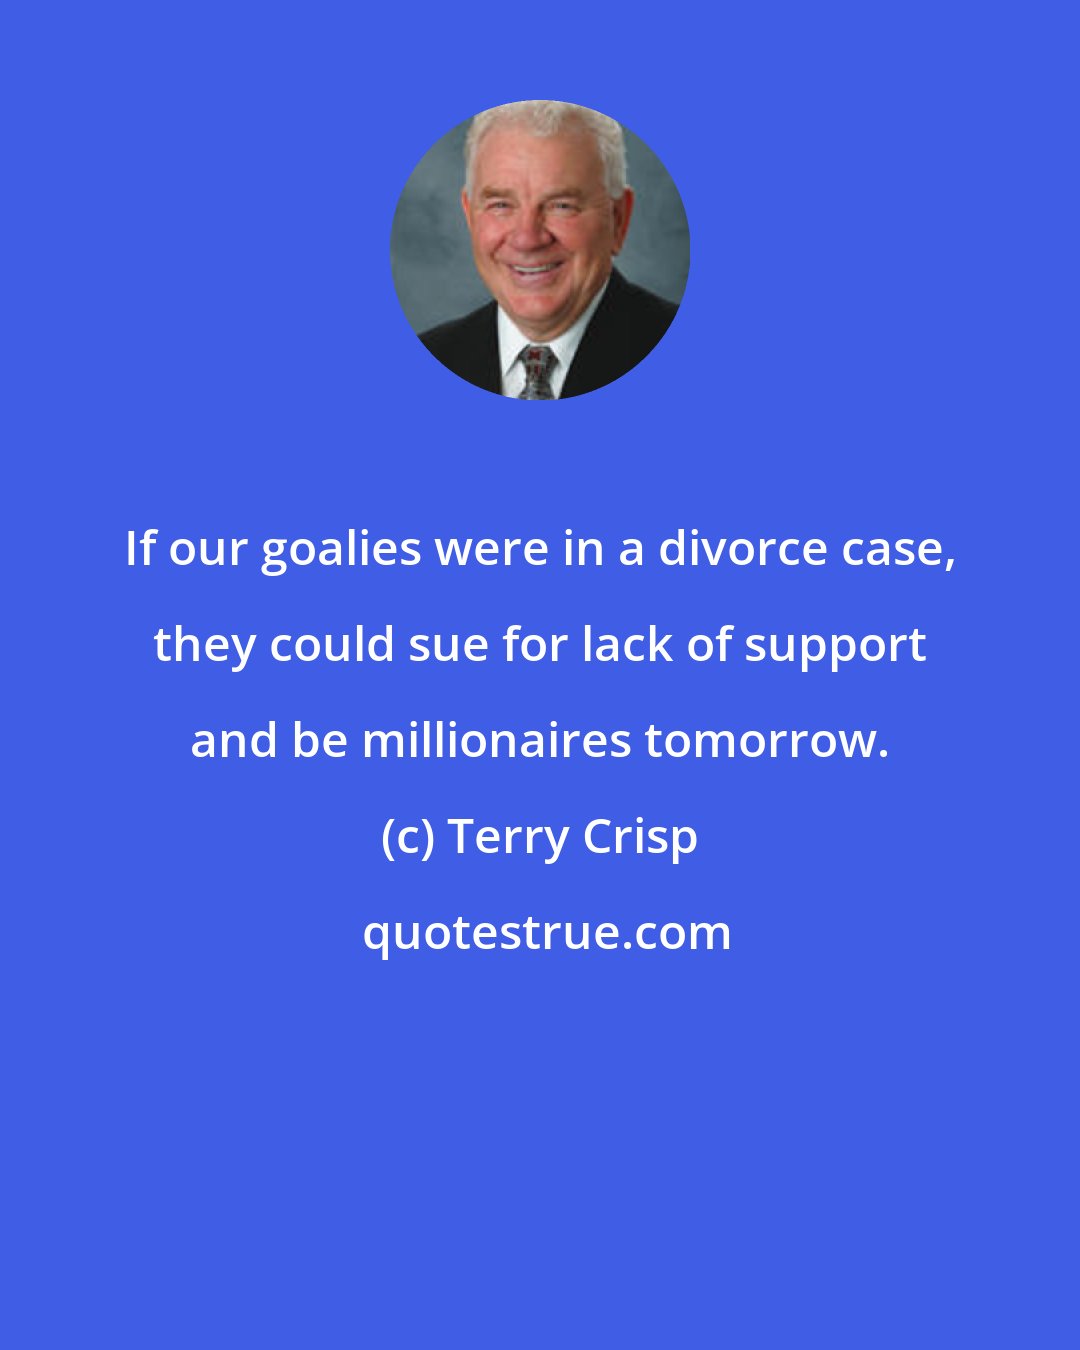 Terry Crisp: If our goalies were in a divorce case, they could sue for lack of support and be millionaires tomorrow.